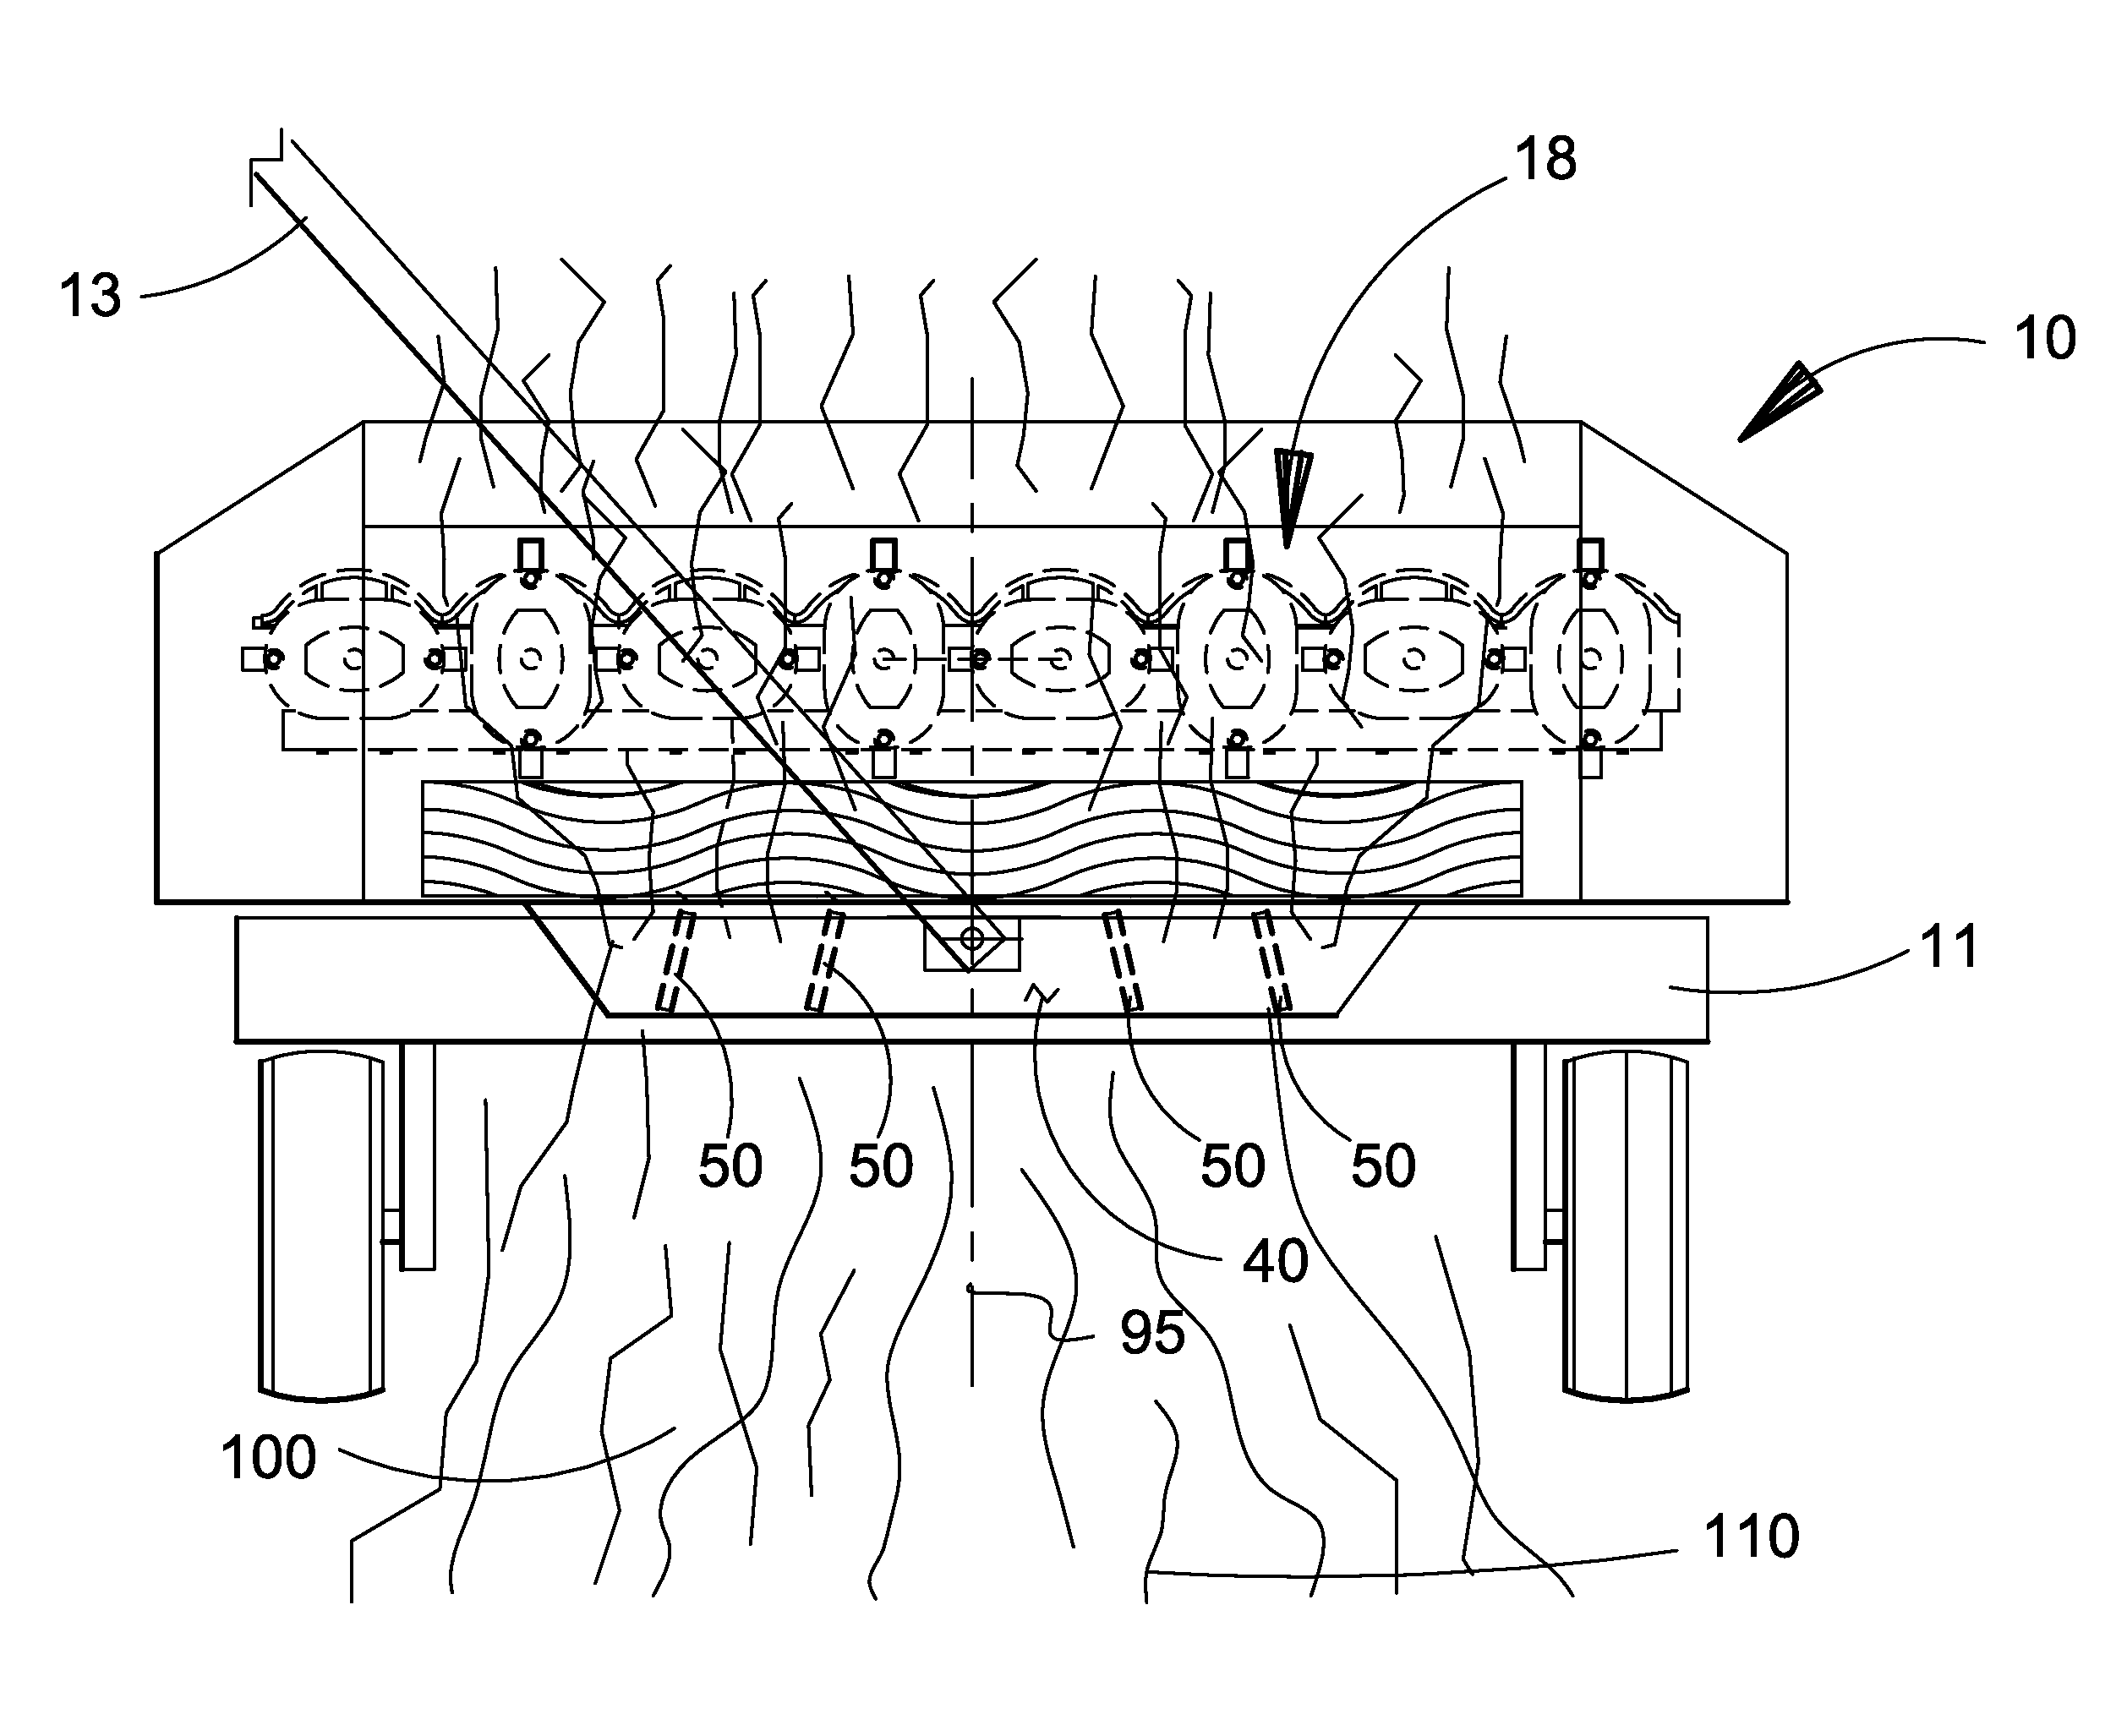 Swathgate with adjustable crop guides and method of crop distribution